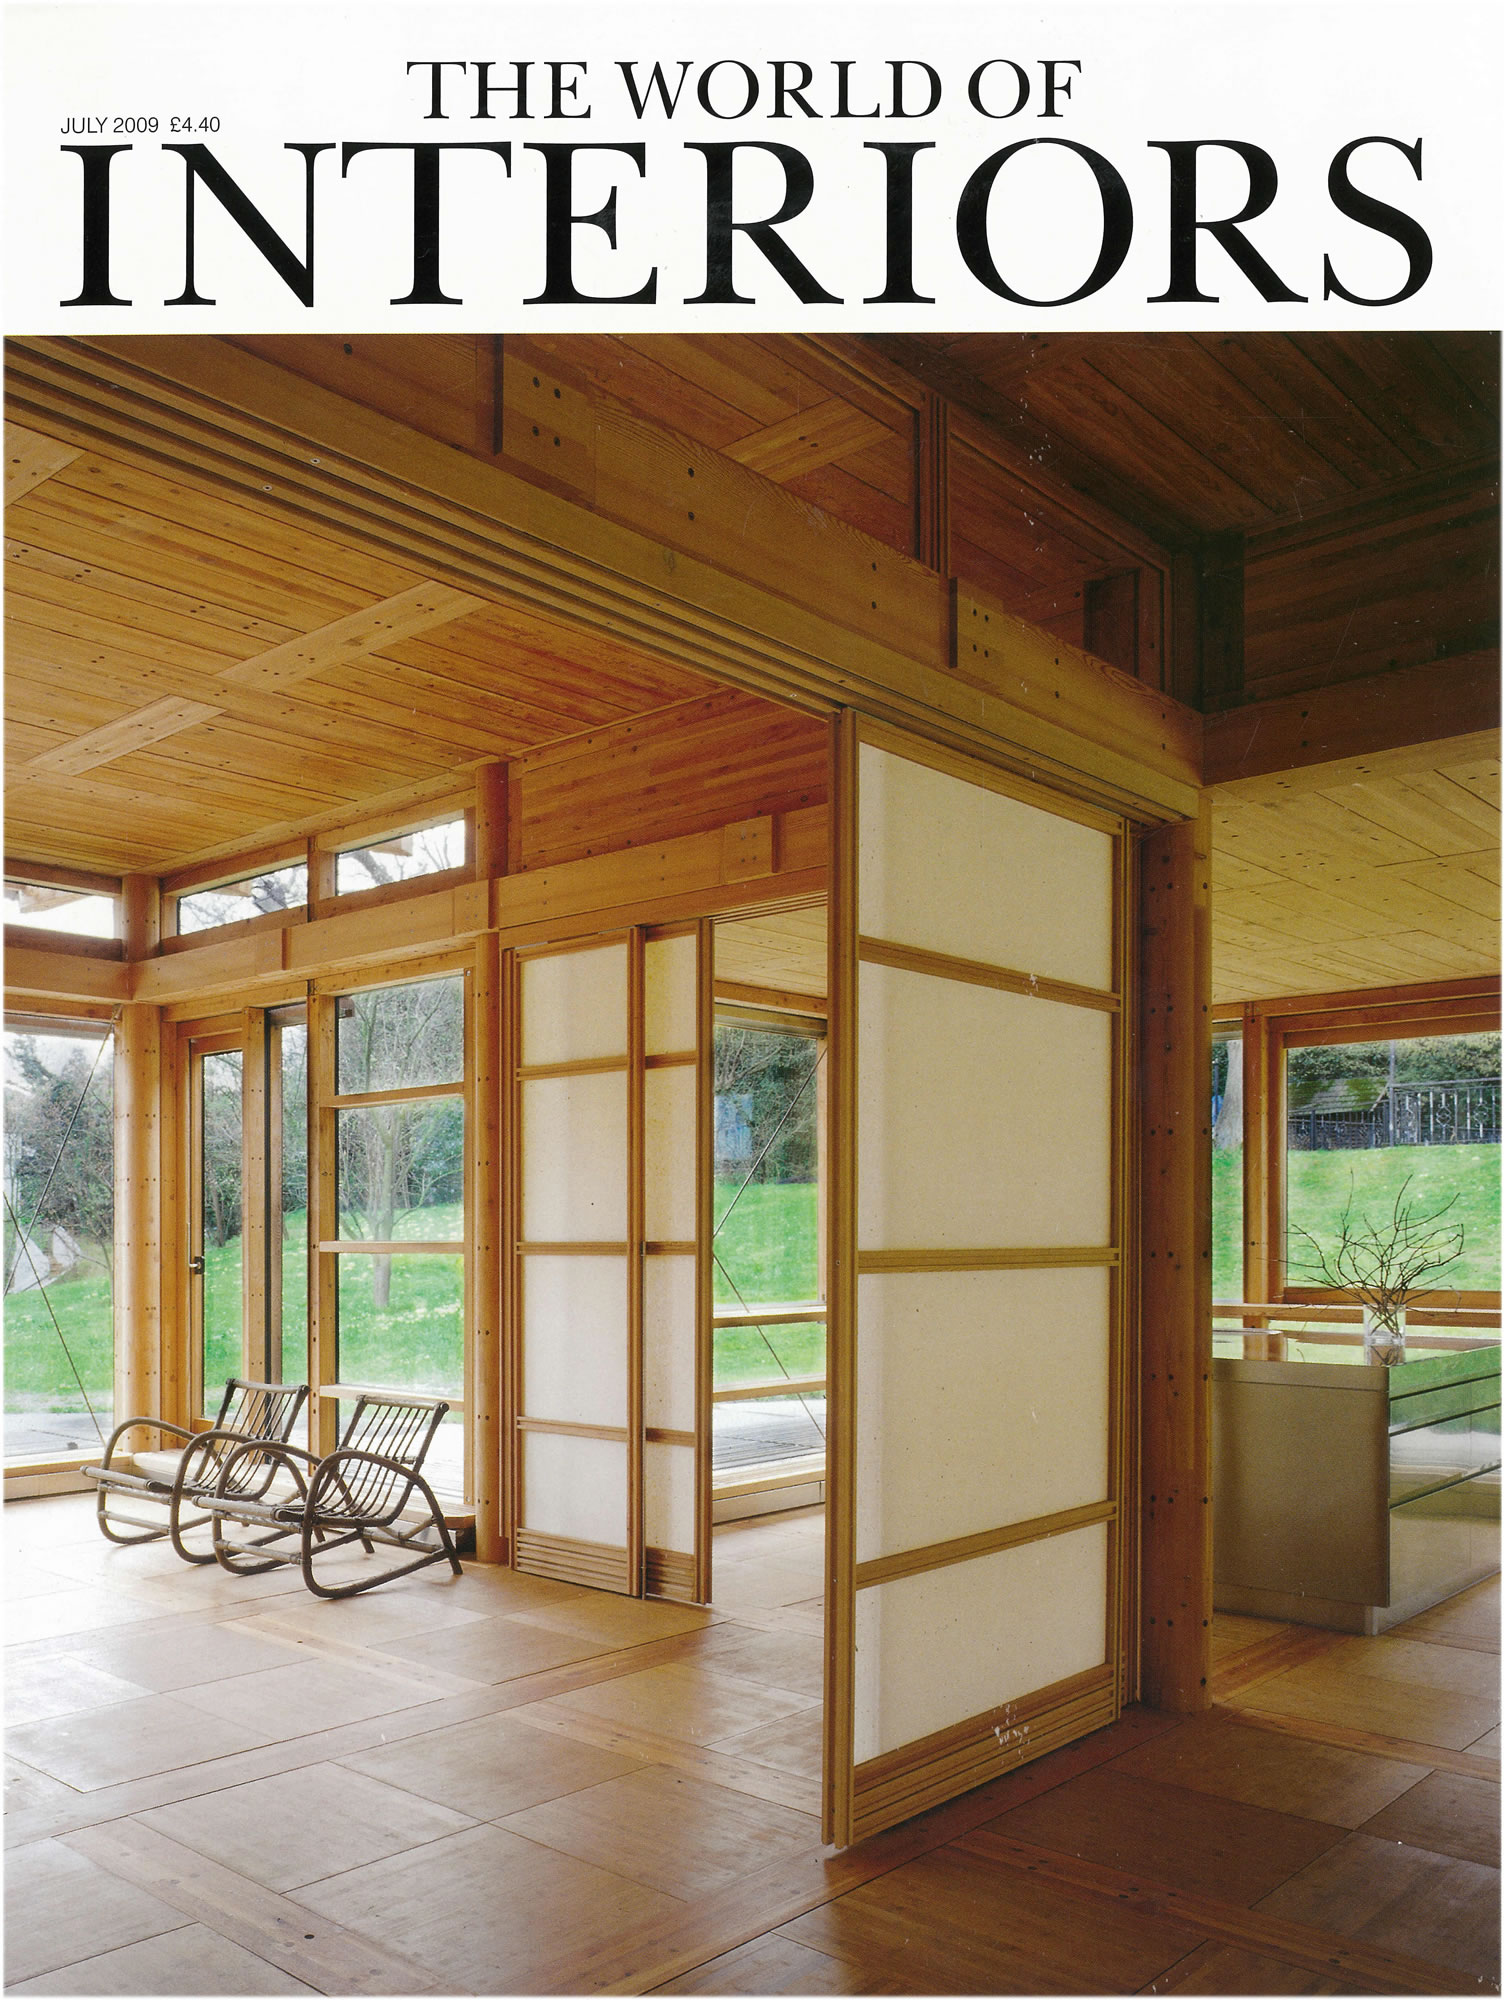 The World of Interiors FP July 2009